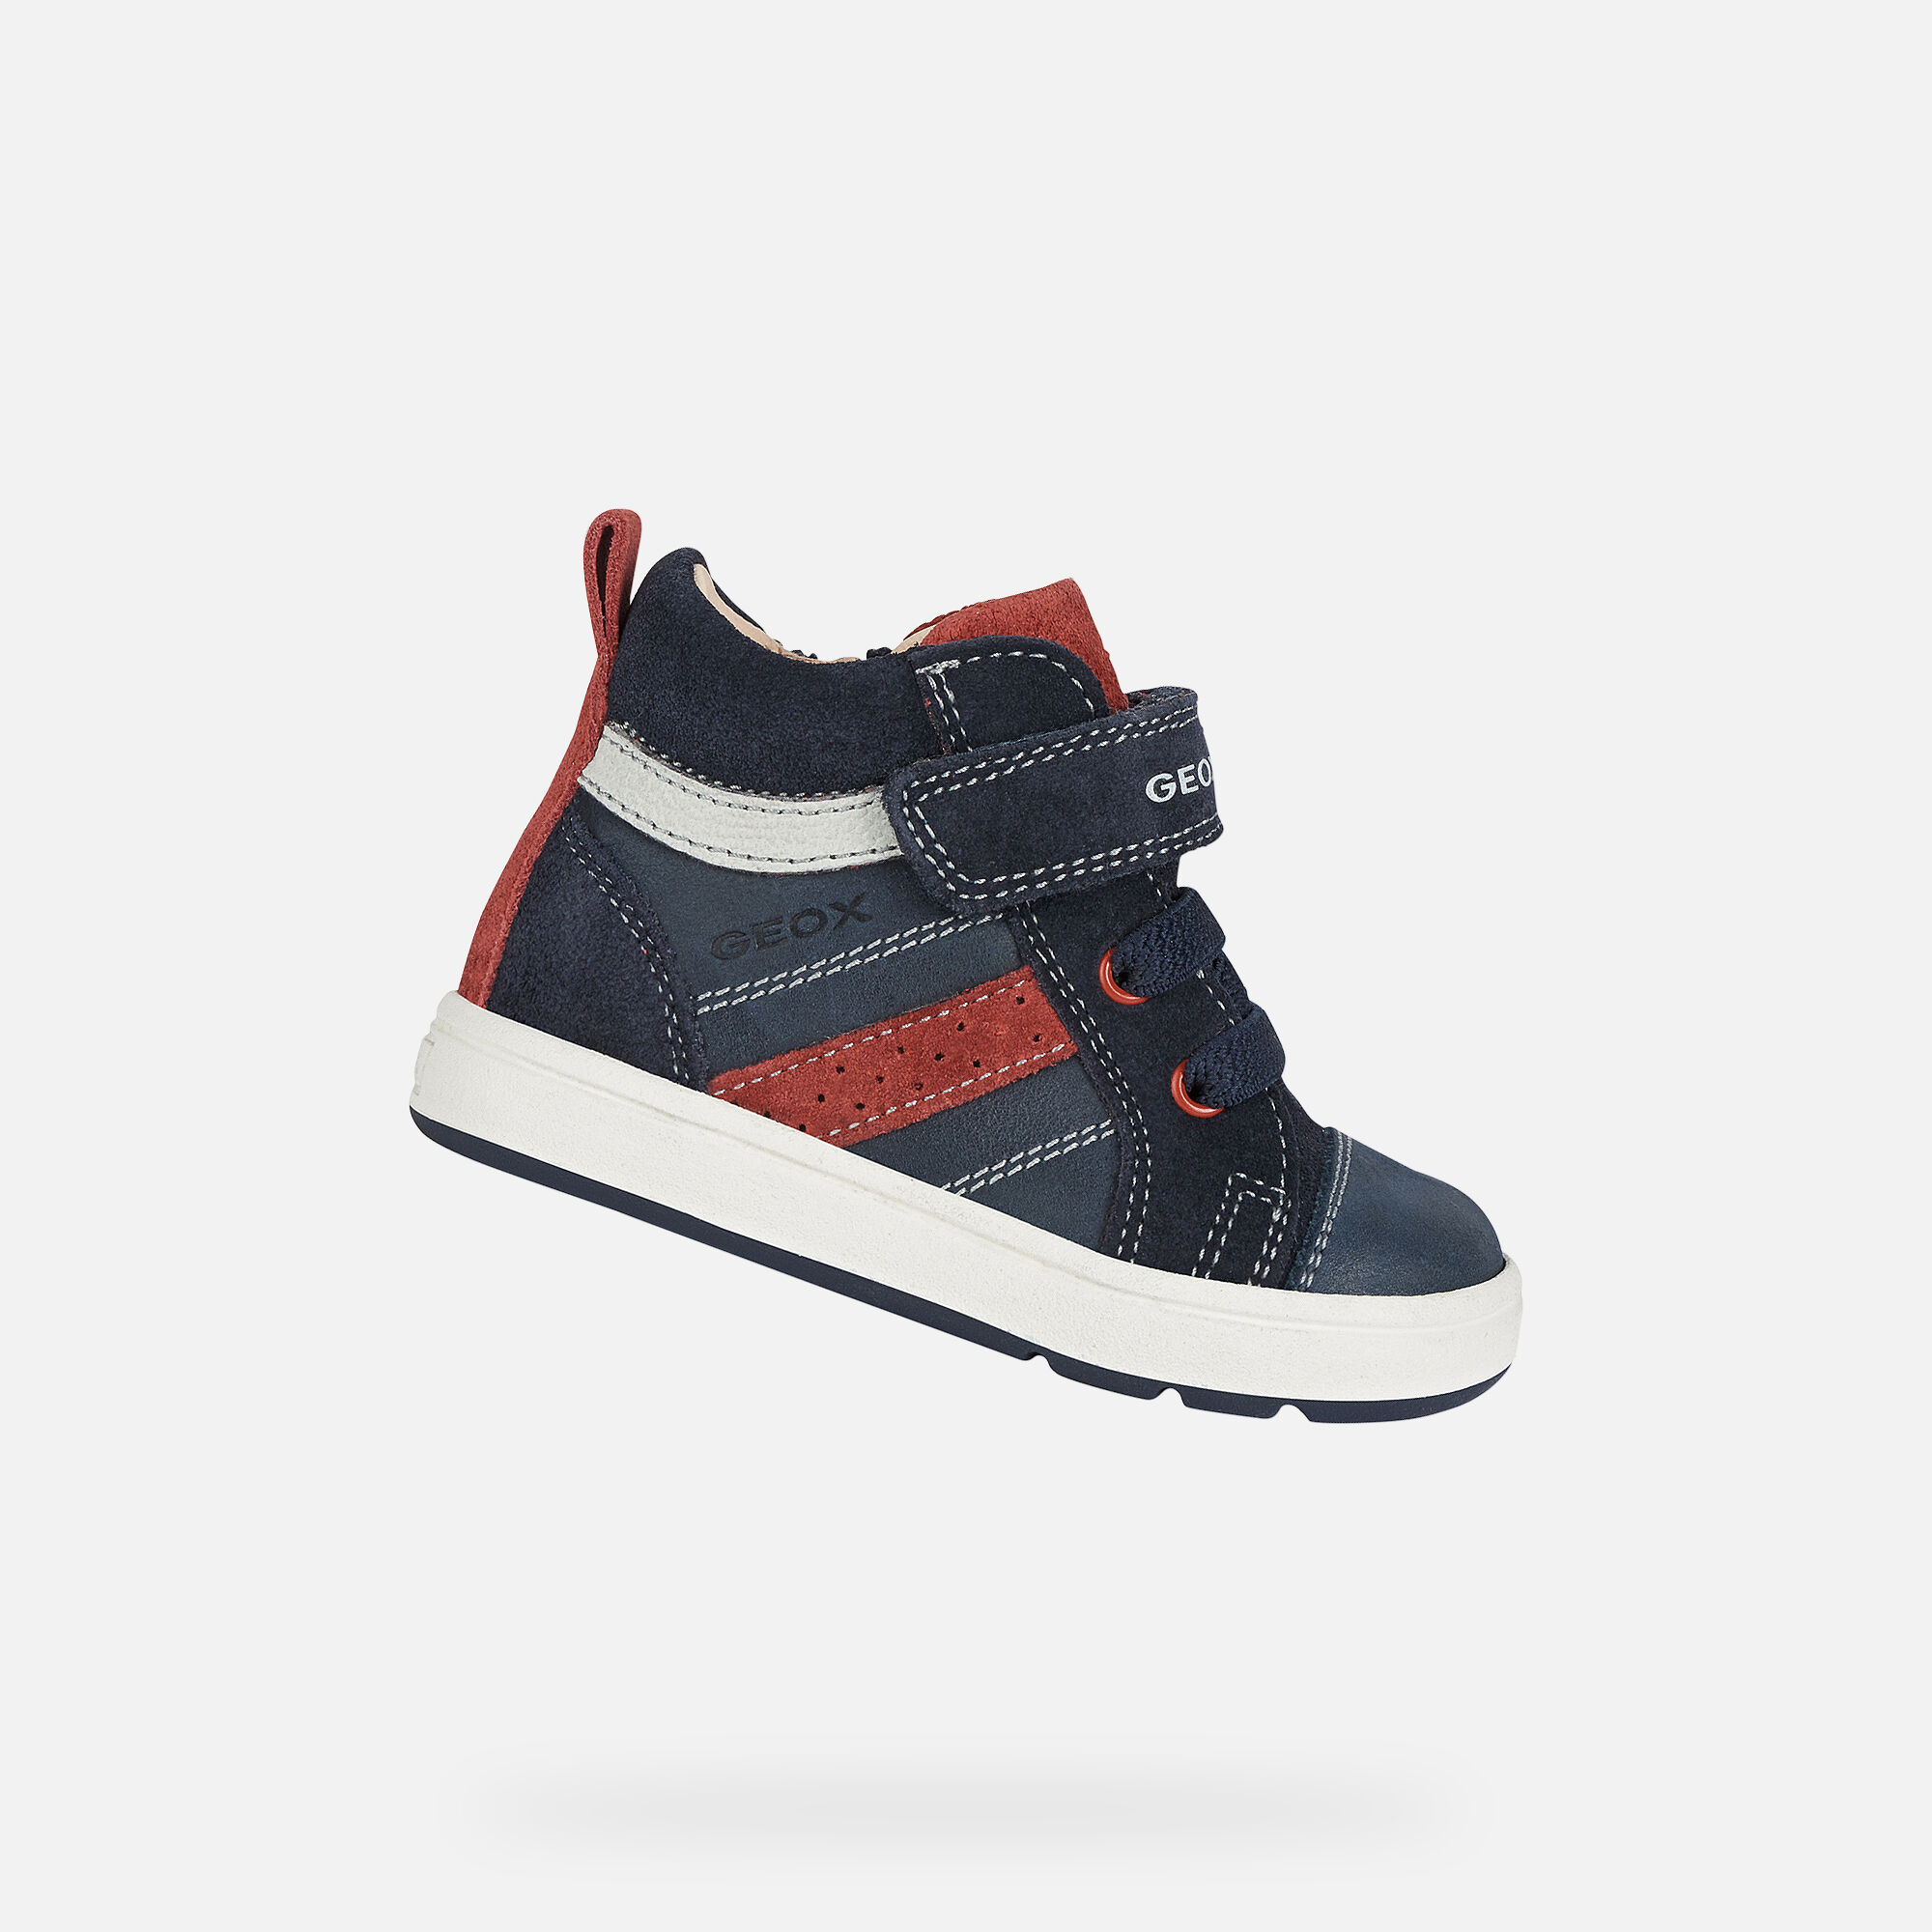 geox toddler boy shoes